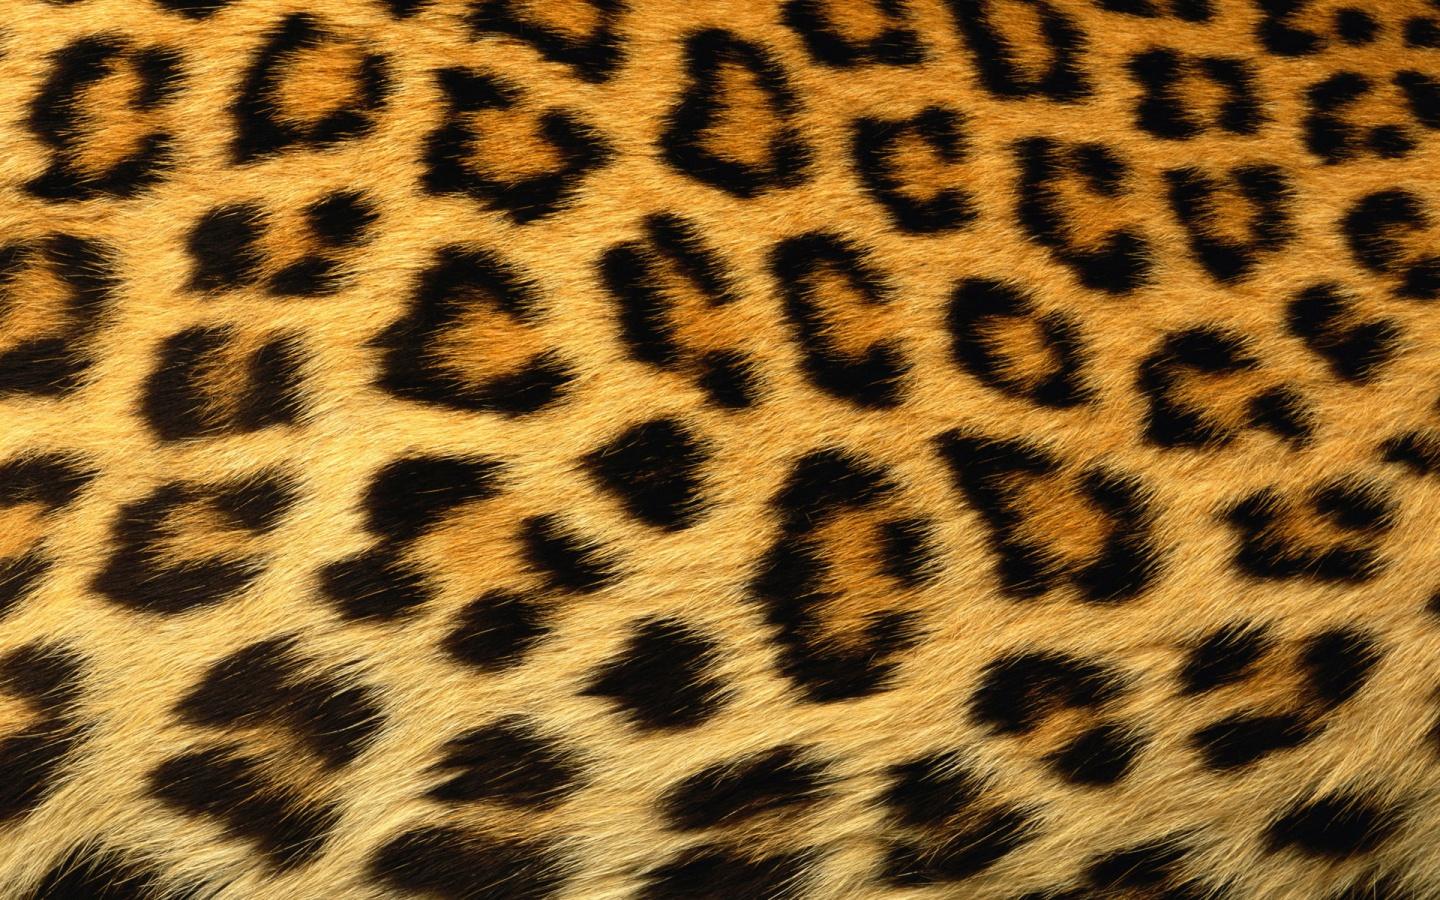 of-negative-thinking-and-the-leopard’s-spots